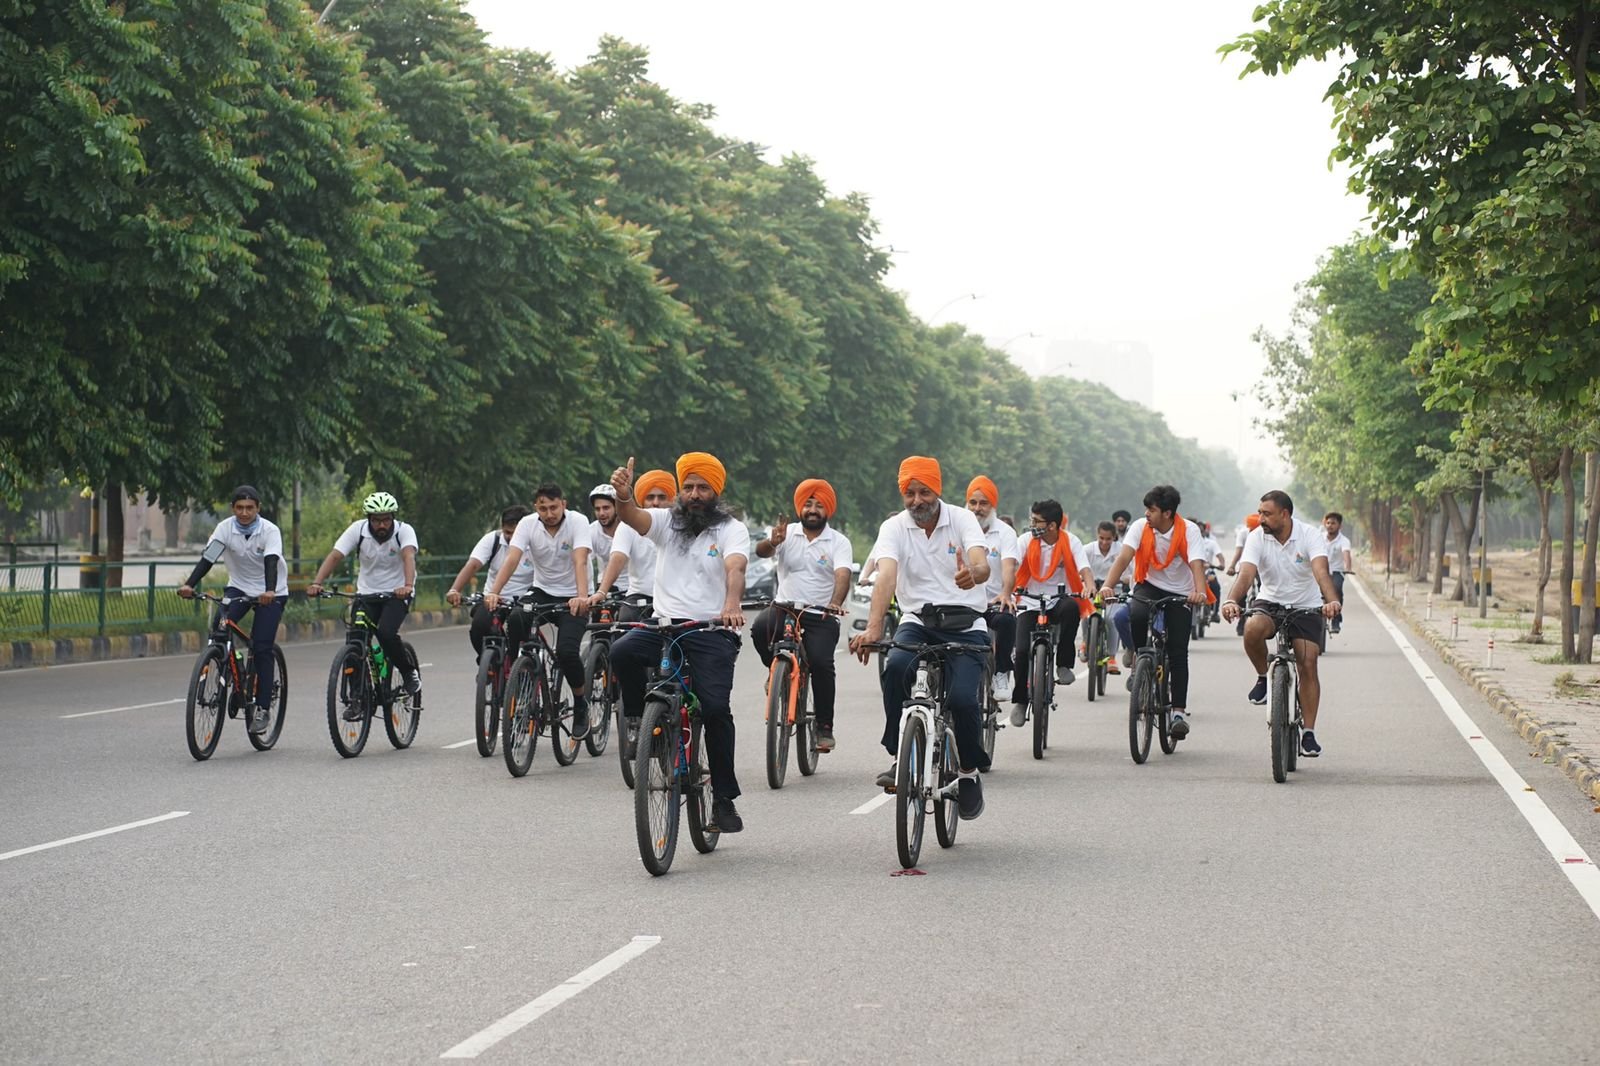 CYCLE RALLY HELD TO MARK INDEPENDENCE DAY FOCUSES ON ENVIRONMENT AND HEALTH ISSUES